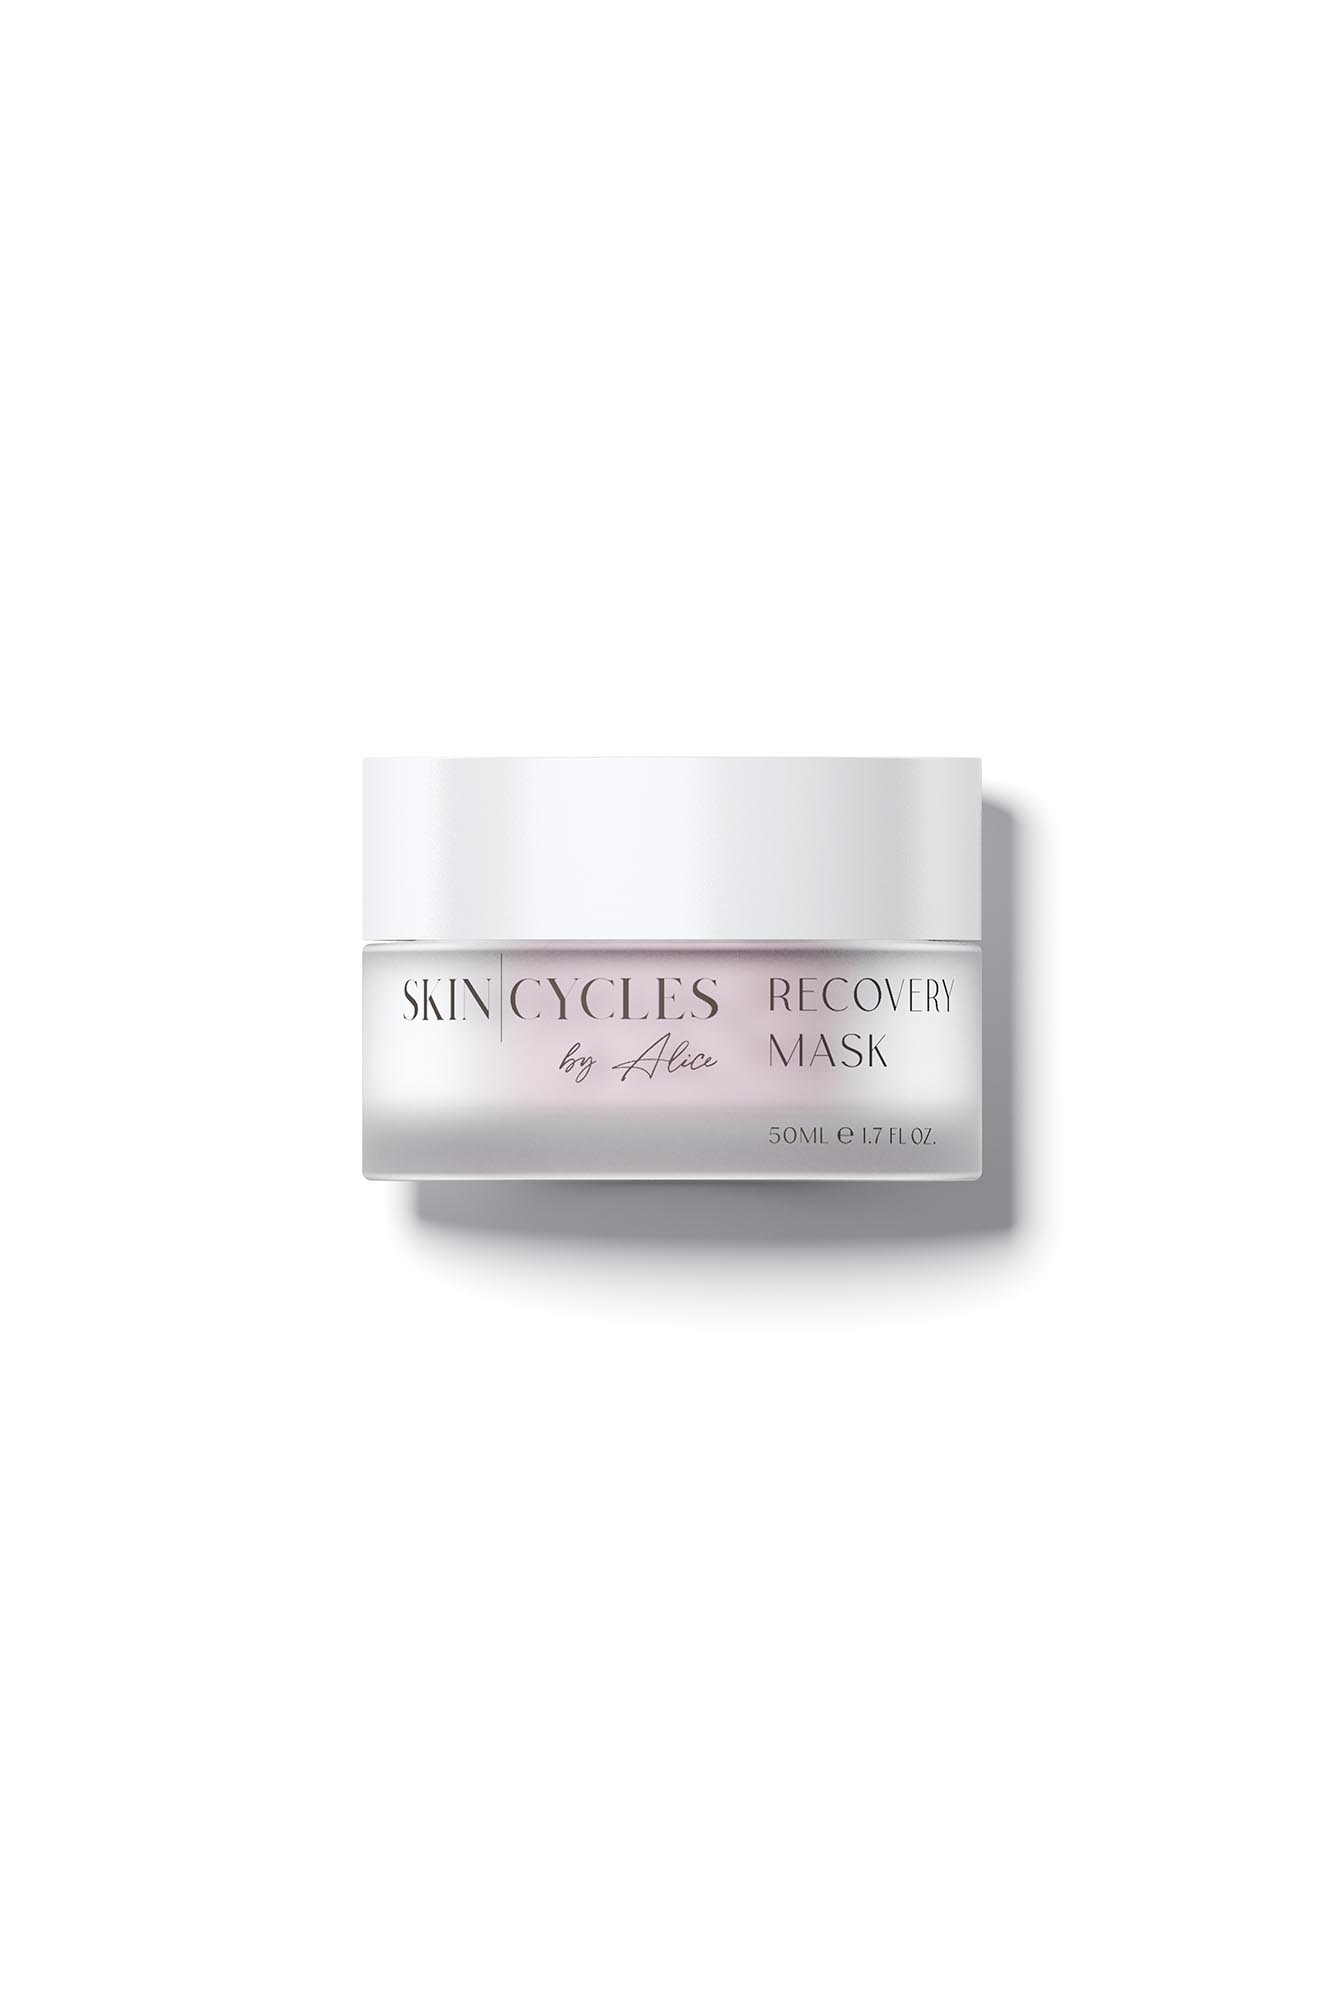 recovery-mask_0005_MG-1143-Skincycles-Products-Product-Recovery-Mask-Final-HR-V01-01